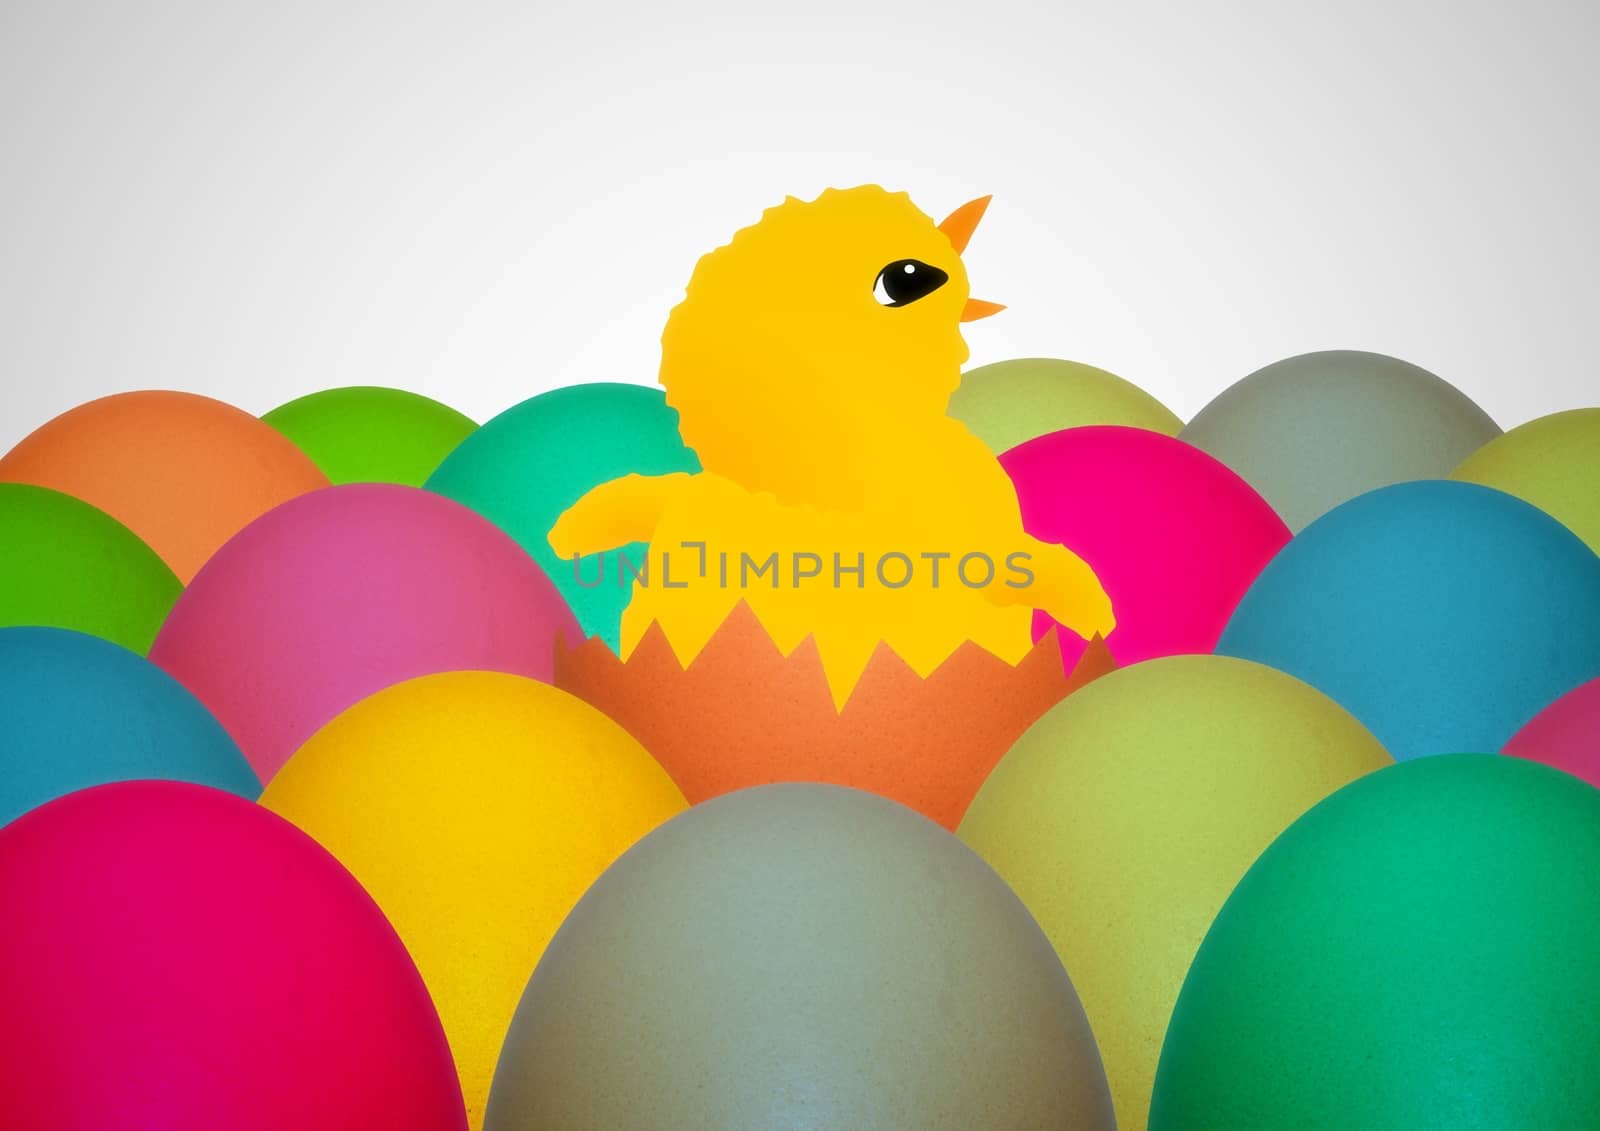 Illustration of an Easter chick surrounded by colorful eggs